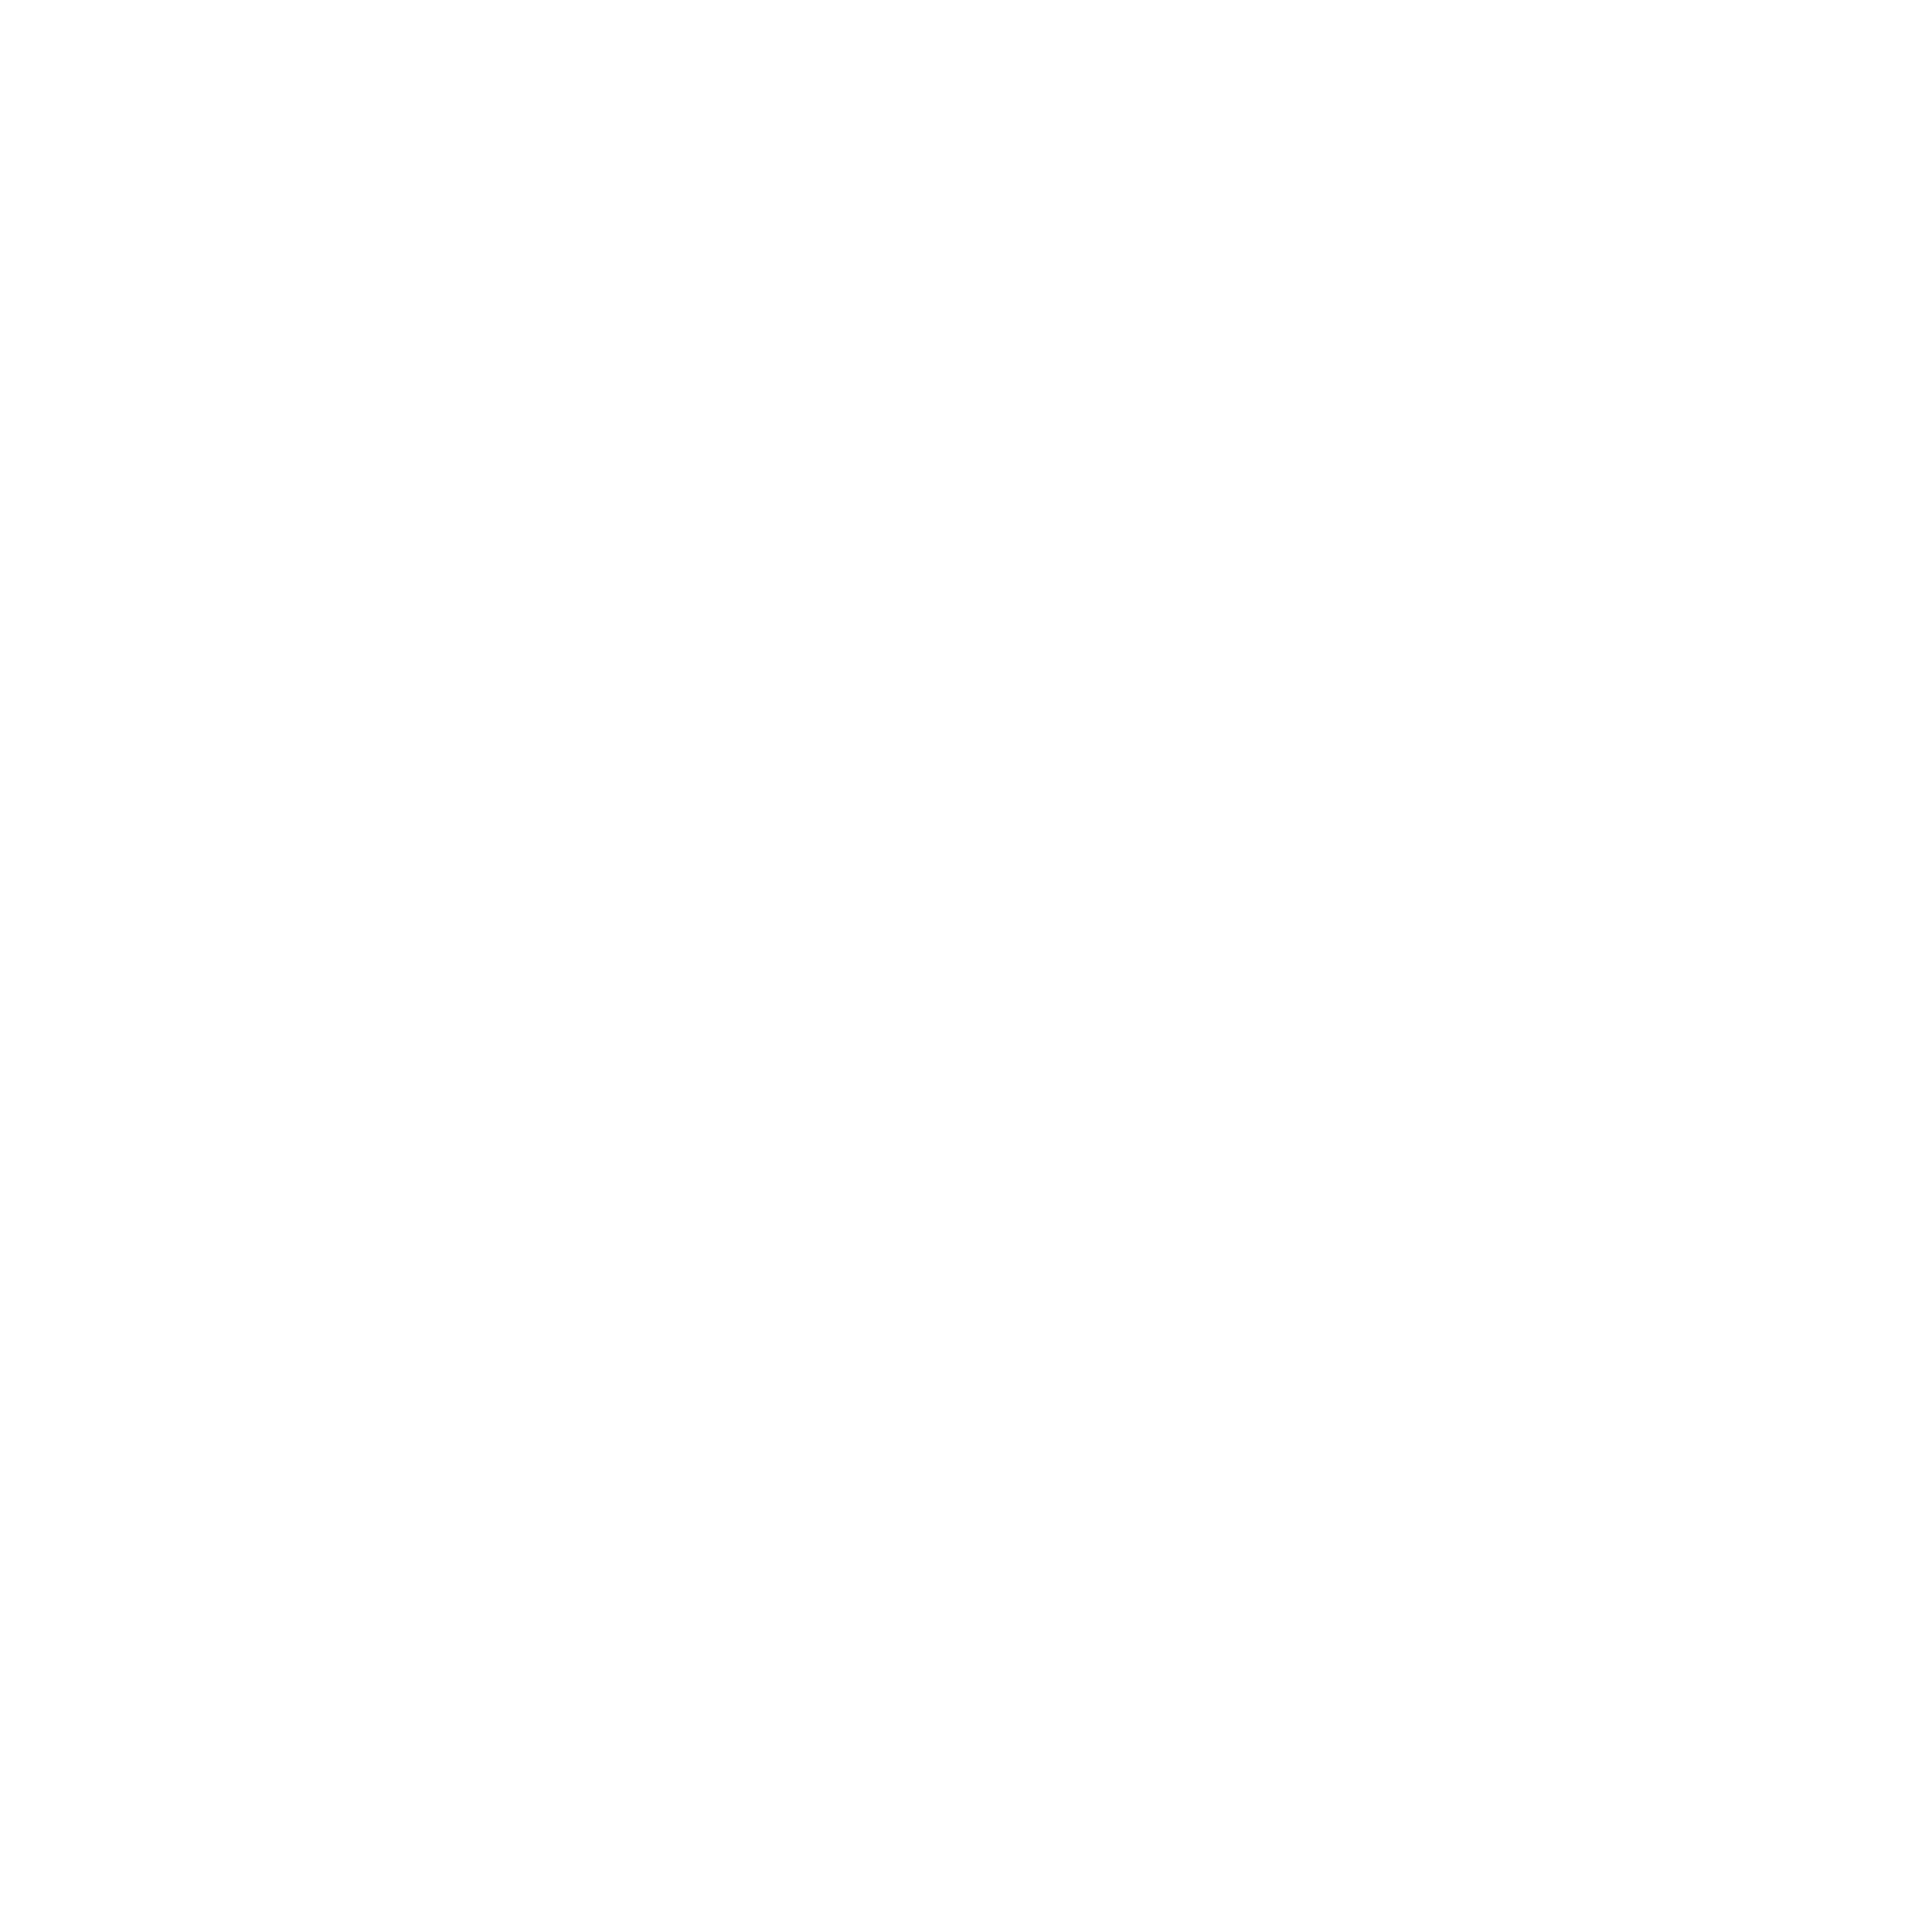 Behind the Marketing